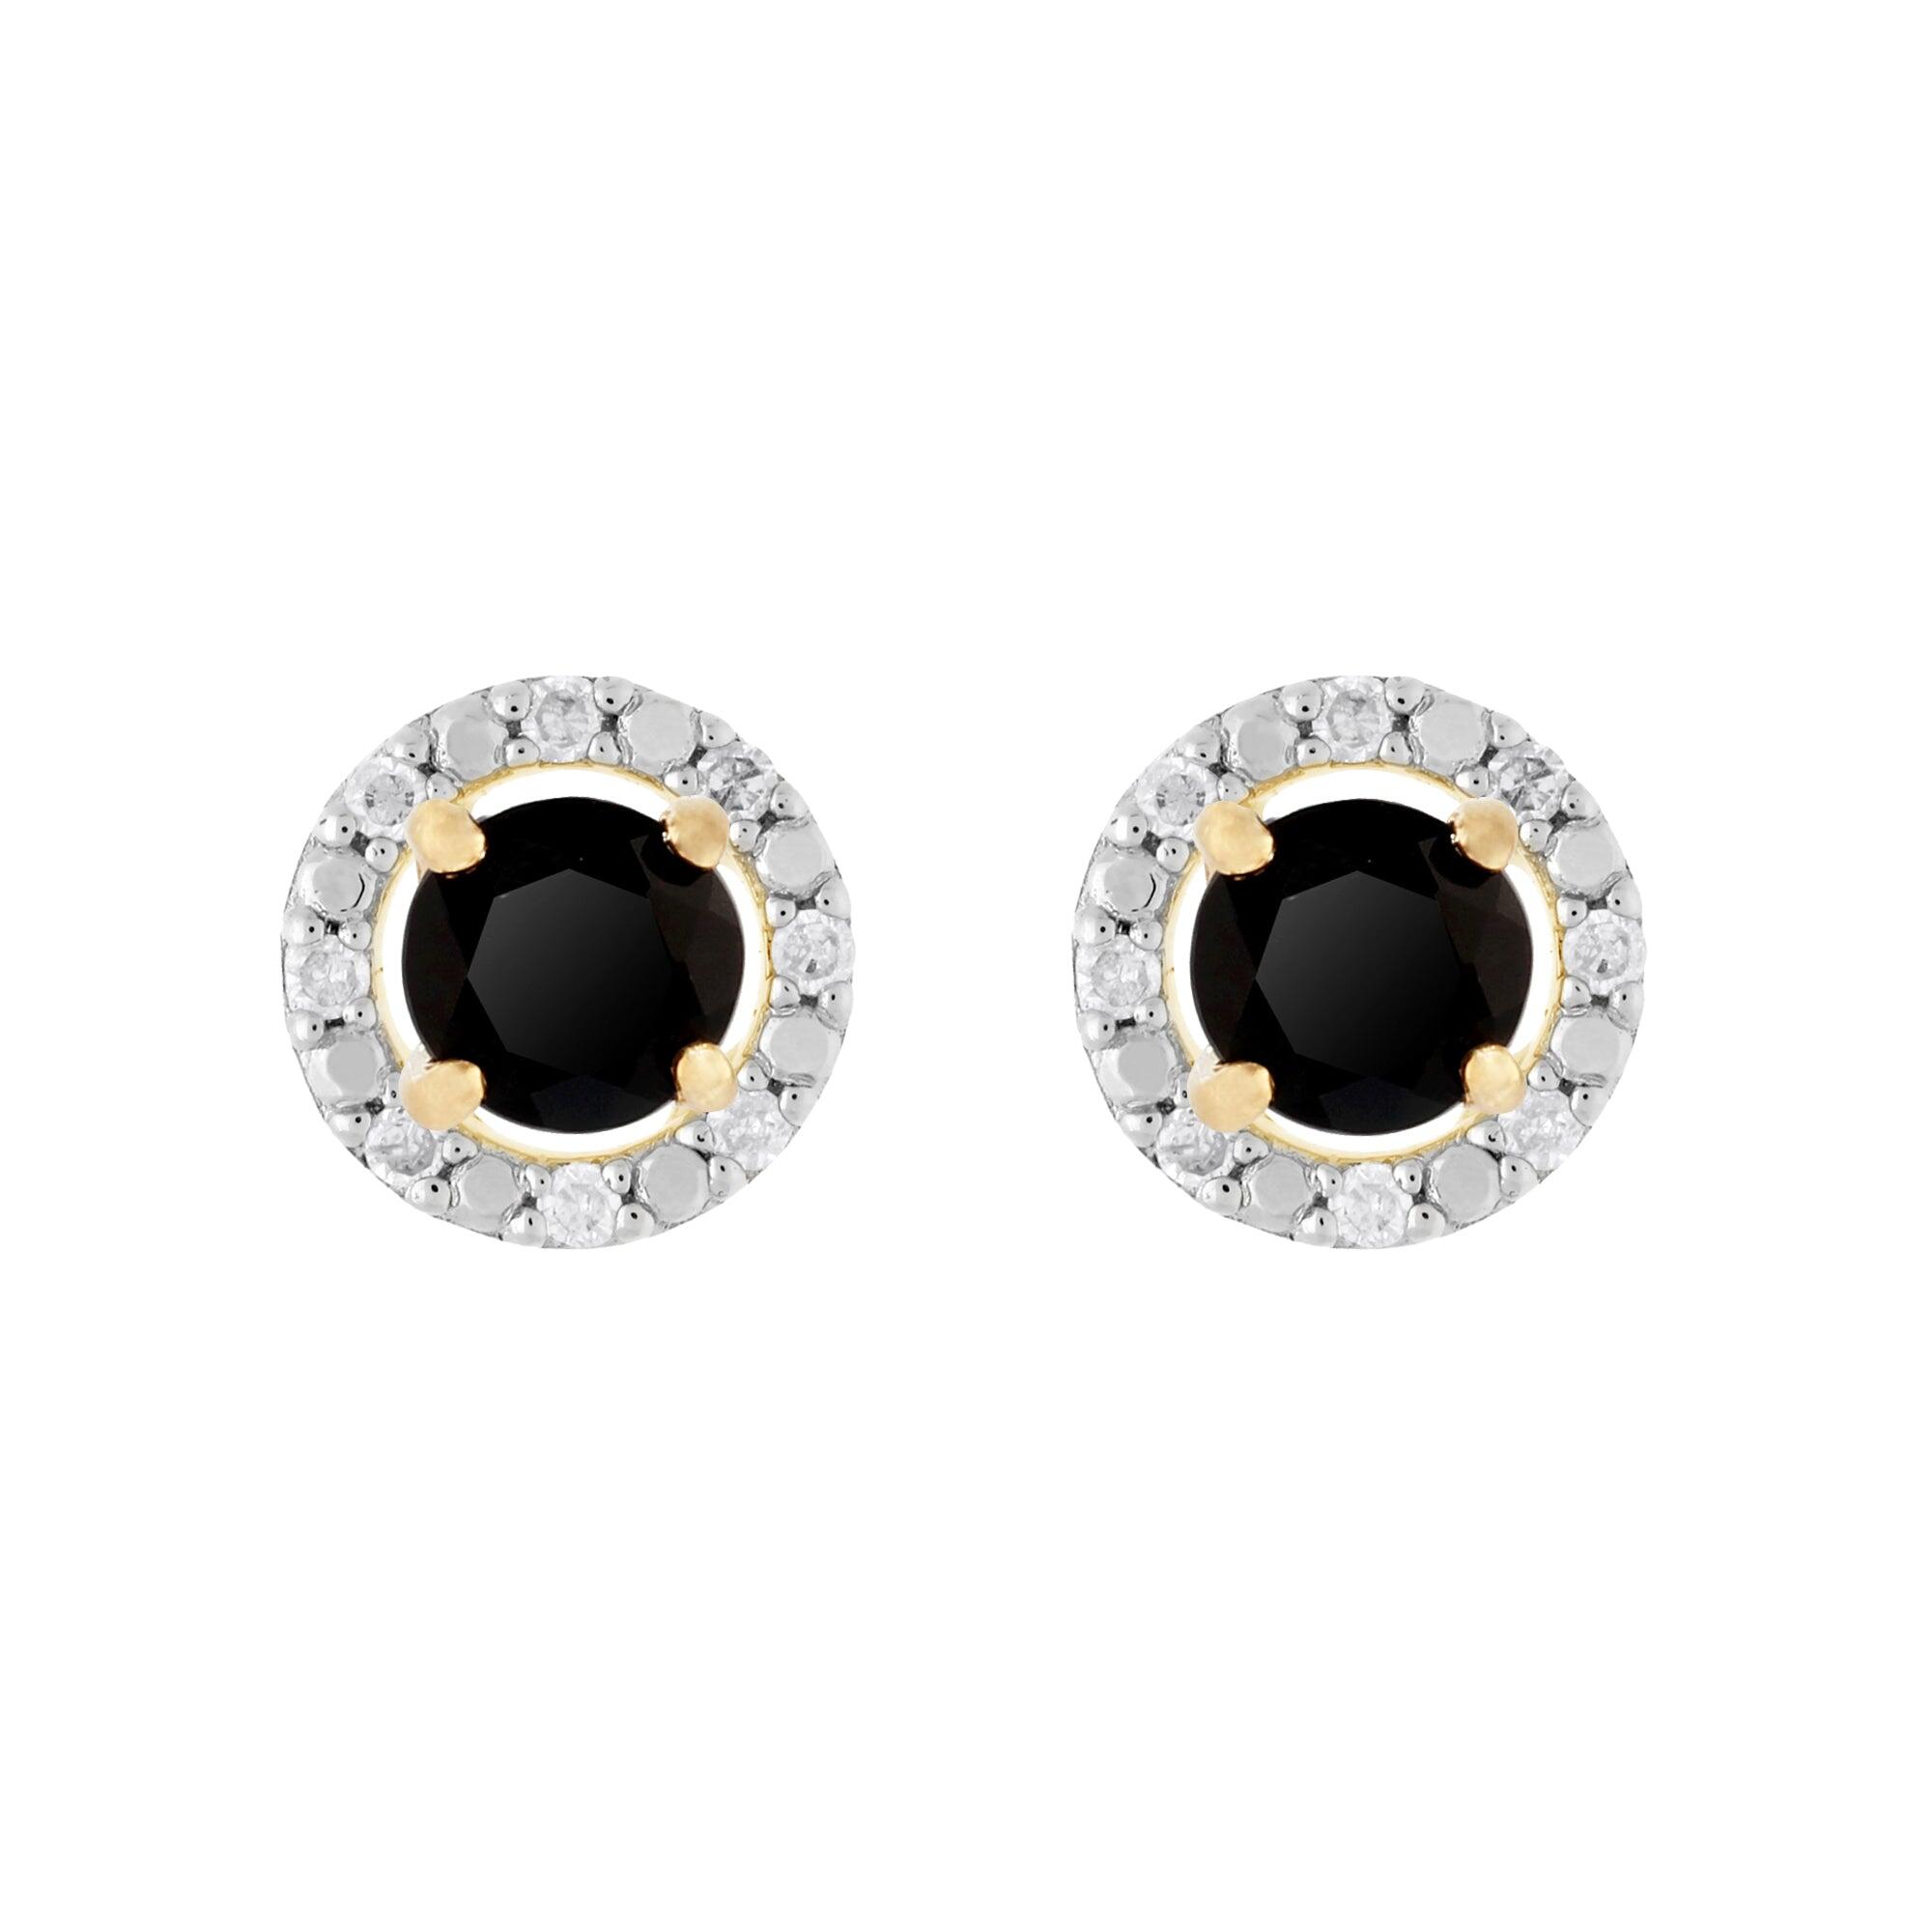 Classic Round Black Onyx Stud Earrings with Detachable Diamond Round Earrings Jacket Set in 9ct Yellow Gold